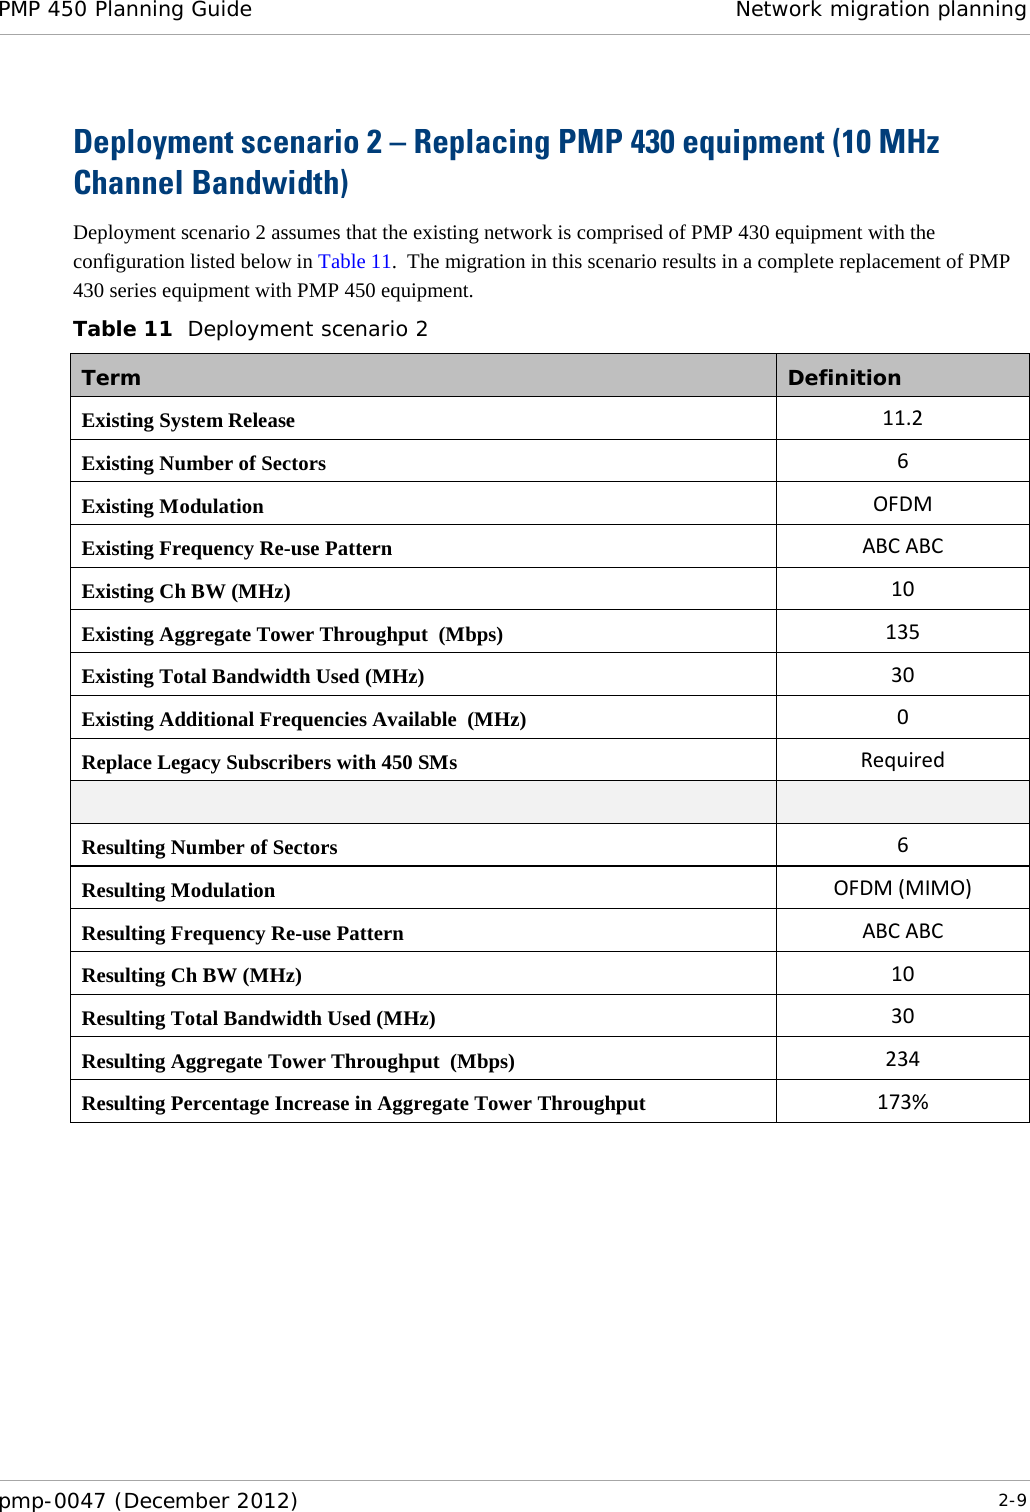 PMP 450 Planning Guide Network migration planning  pmp-0047 (December 2012)  2-9  Deployment scenario 2 – Replacing PMP 430 equipment (10 MHz Channel Bandwidth) Deployment scenario 2 assumes that the existing network is comprised of PMP 430 equipment with the configuration listed below in Table 11.  The migration in this scenario results in a complete replacement of PMP 430 series equipment with PMP 450 equipment. Table 11  Deployment scenario 2 Term Definition Existing System Release 11.2 Existing Number of Sectors 6 Existing Modulation OFDM Existing Frequency Re-use Pattern ABC ABC Existing Ch BW (MHz) 10 Existing Aggregate Tower Throughput  (Mbps) 135 Existing Total Bandwidth Used (MHz) 30 Existing Additional Frequencies Available  (MHz) 0 Replace Legacy Subscribers with 450 SMs Required   Resulting Number of Sectors 6 Resulting Modulation OFDM (MIMO) Resulting Frequency Re-use Pattern ABC ABC Resulting Ch BW (MHz) 10 Resulting Total Bandwidth Used (MHz) 30 Resulting Aggregate Tower Throughput  (Mbps) 234 Resulting Percentage Increase in Aggregate Tower Throughput 173%  